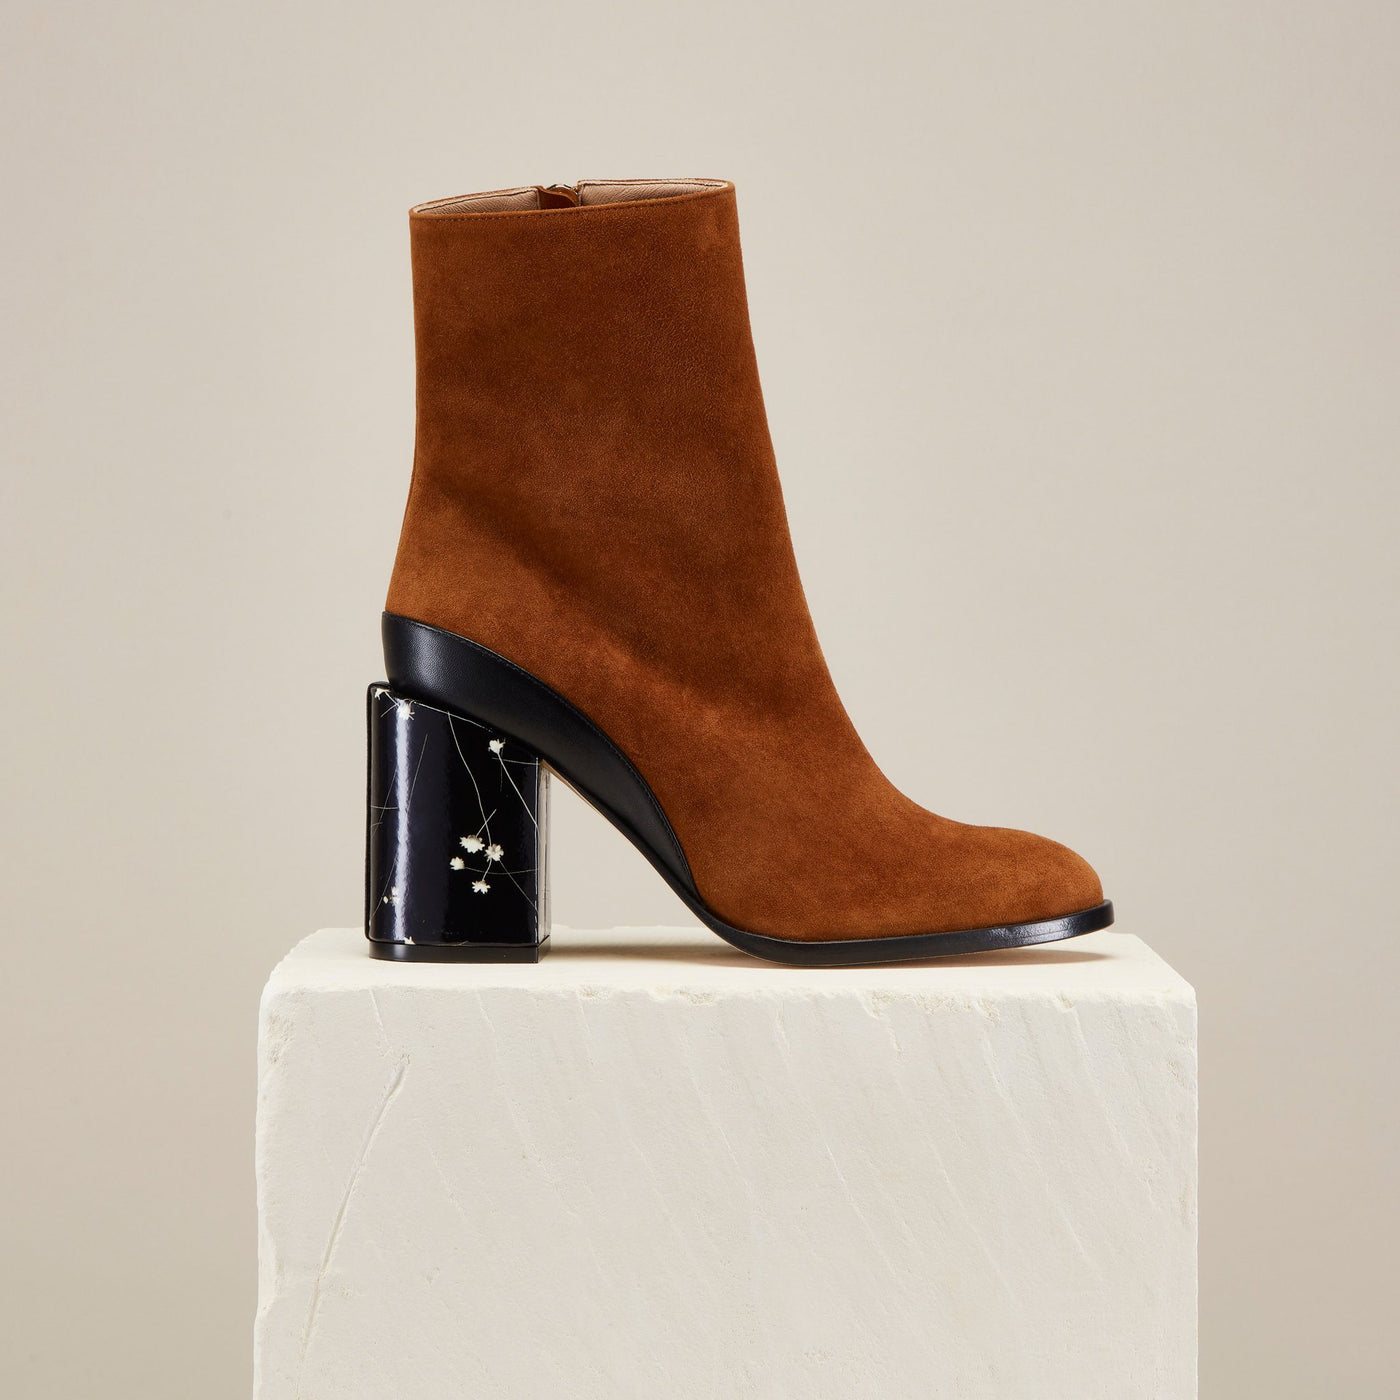 The Dear Frances Spirit Boot, Perfect Ankle Boot